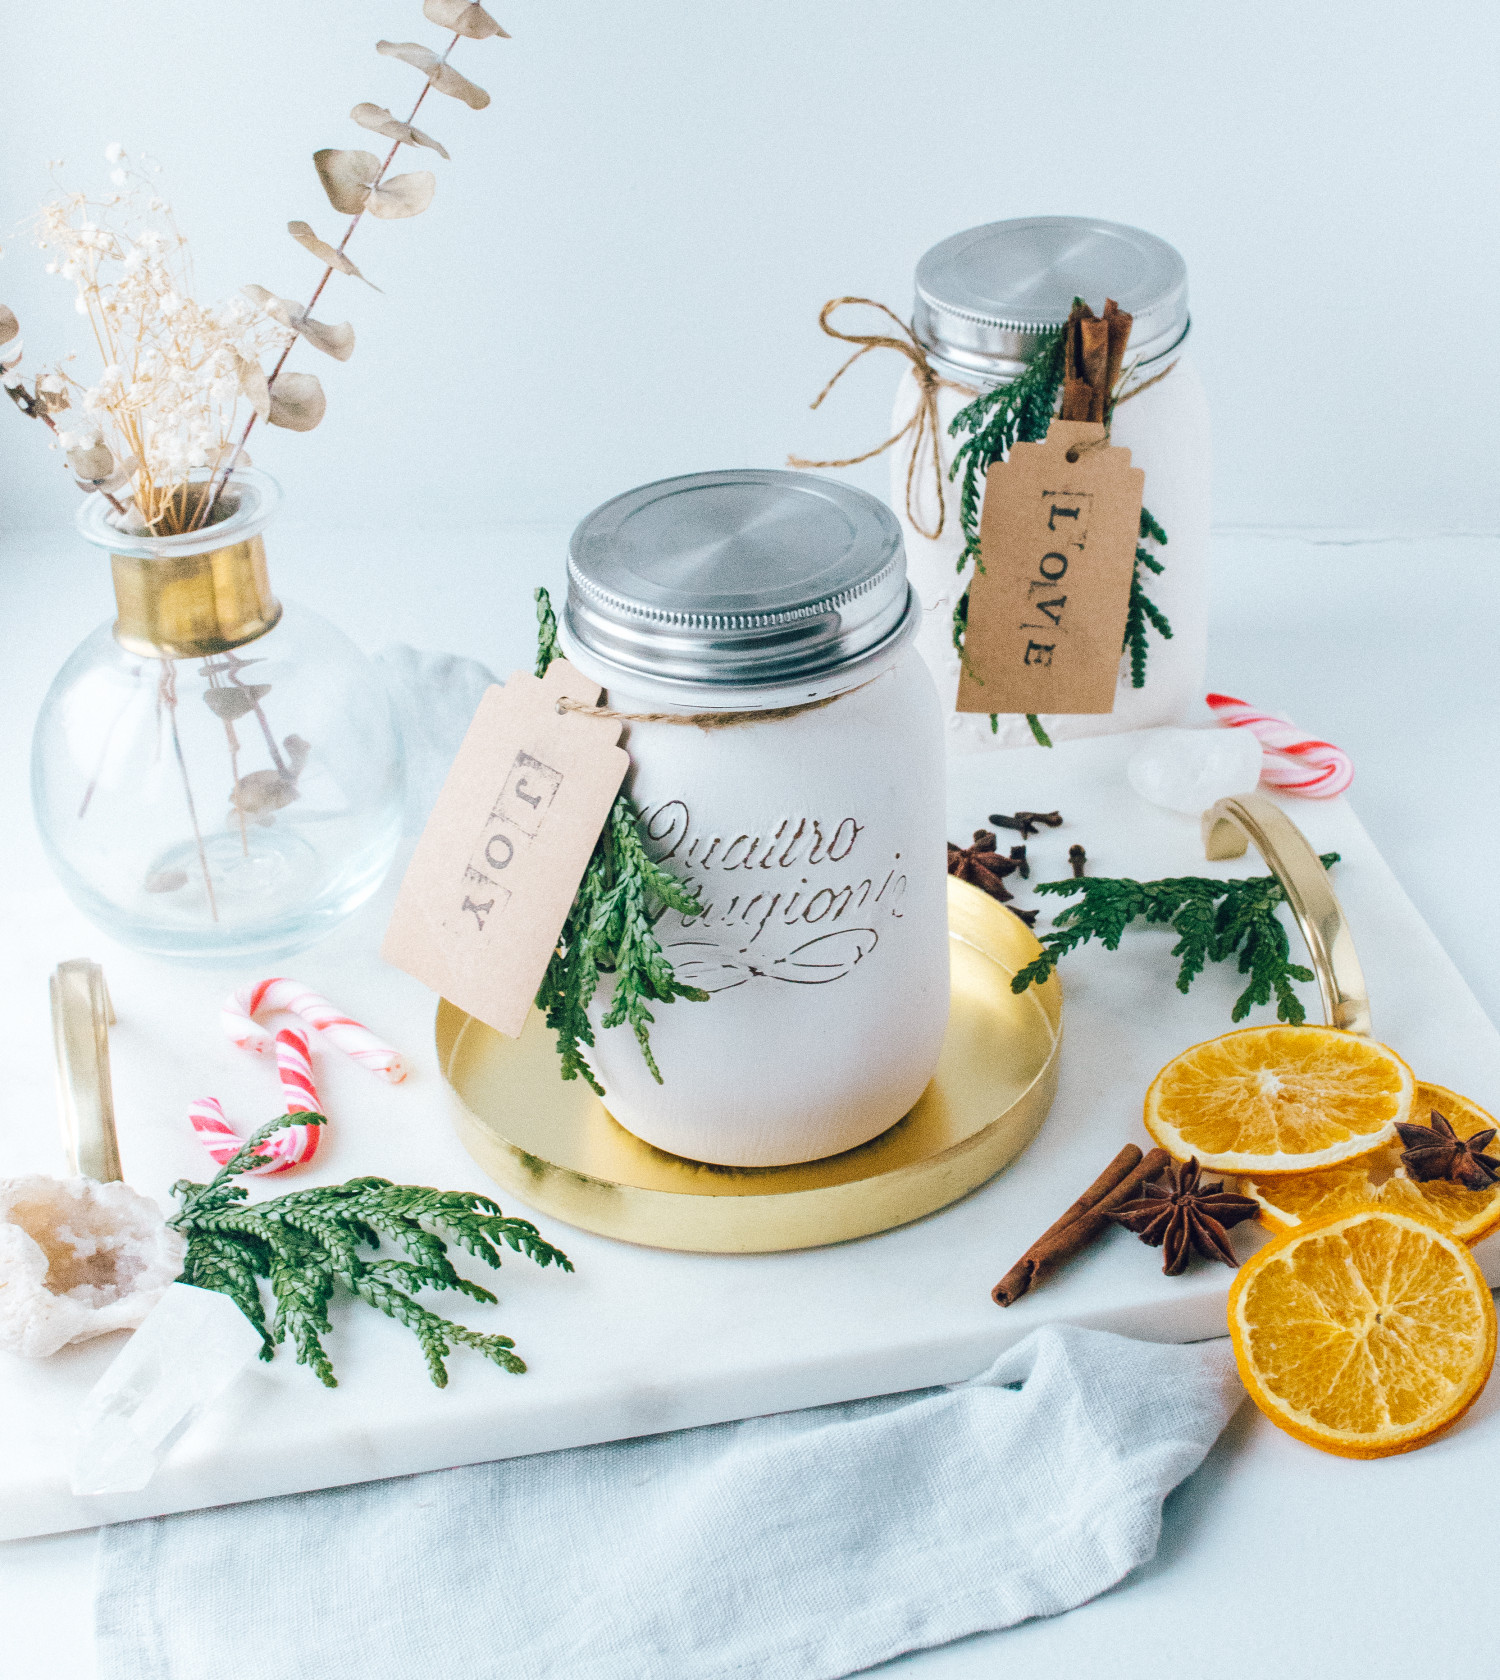 DIY // Handmade scented beeswax candles - the perfect homemade christmas present (w. video)